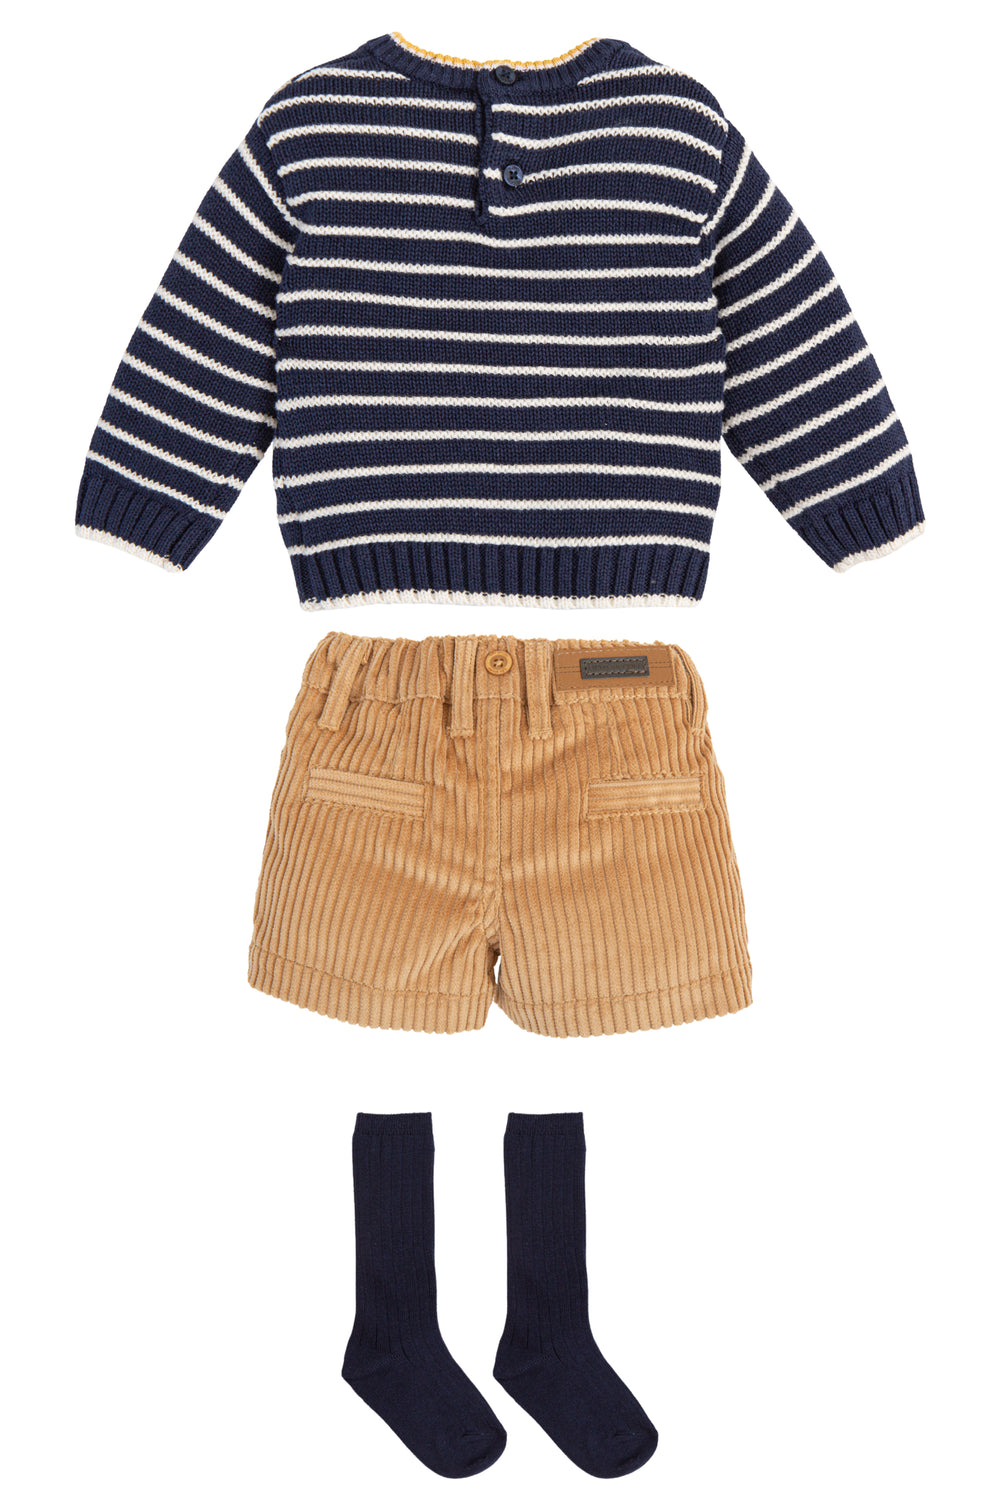 Tutto Piccolo "Tommy" Navy Striped Bear Jumper, Shorts & Socks | Millie and John